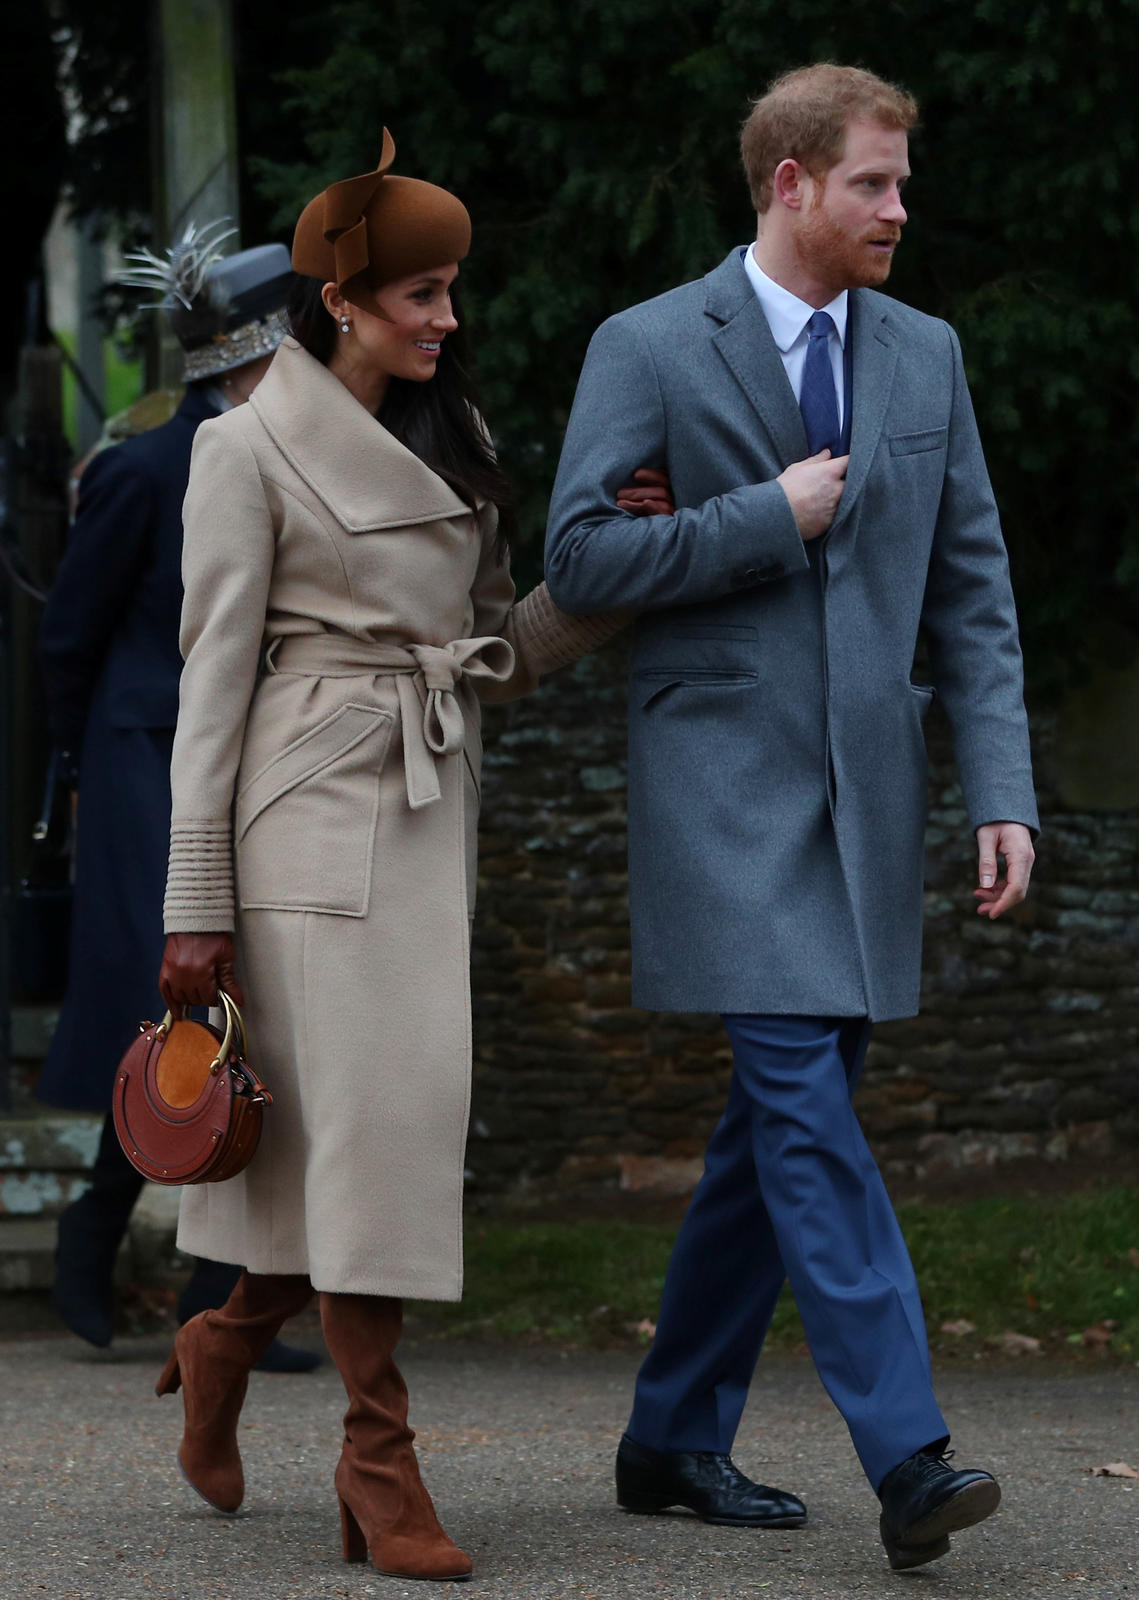 Britain’s Prince Harry and his fiancee Meghan Markle leave St Mary Magdalene’s church after the Royal Family’s Christmas Day service on the Sandringham estate in eastern England